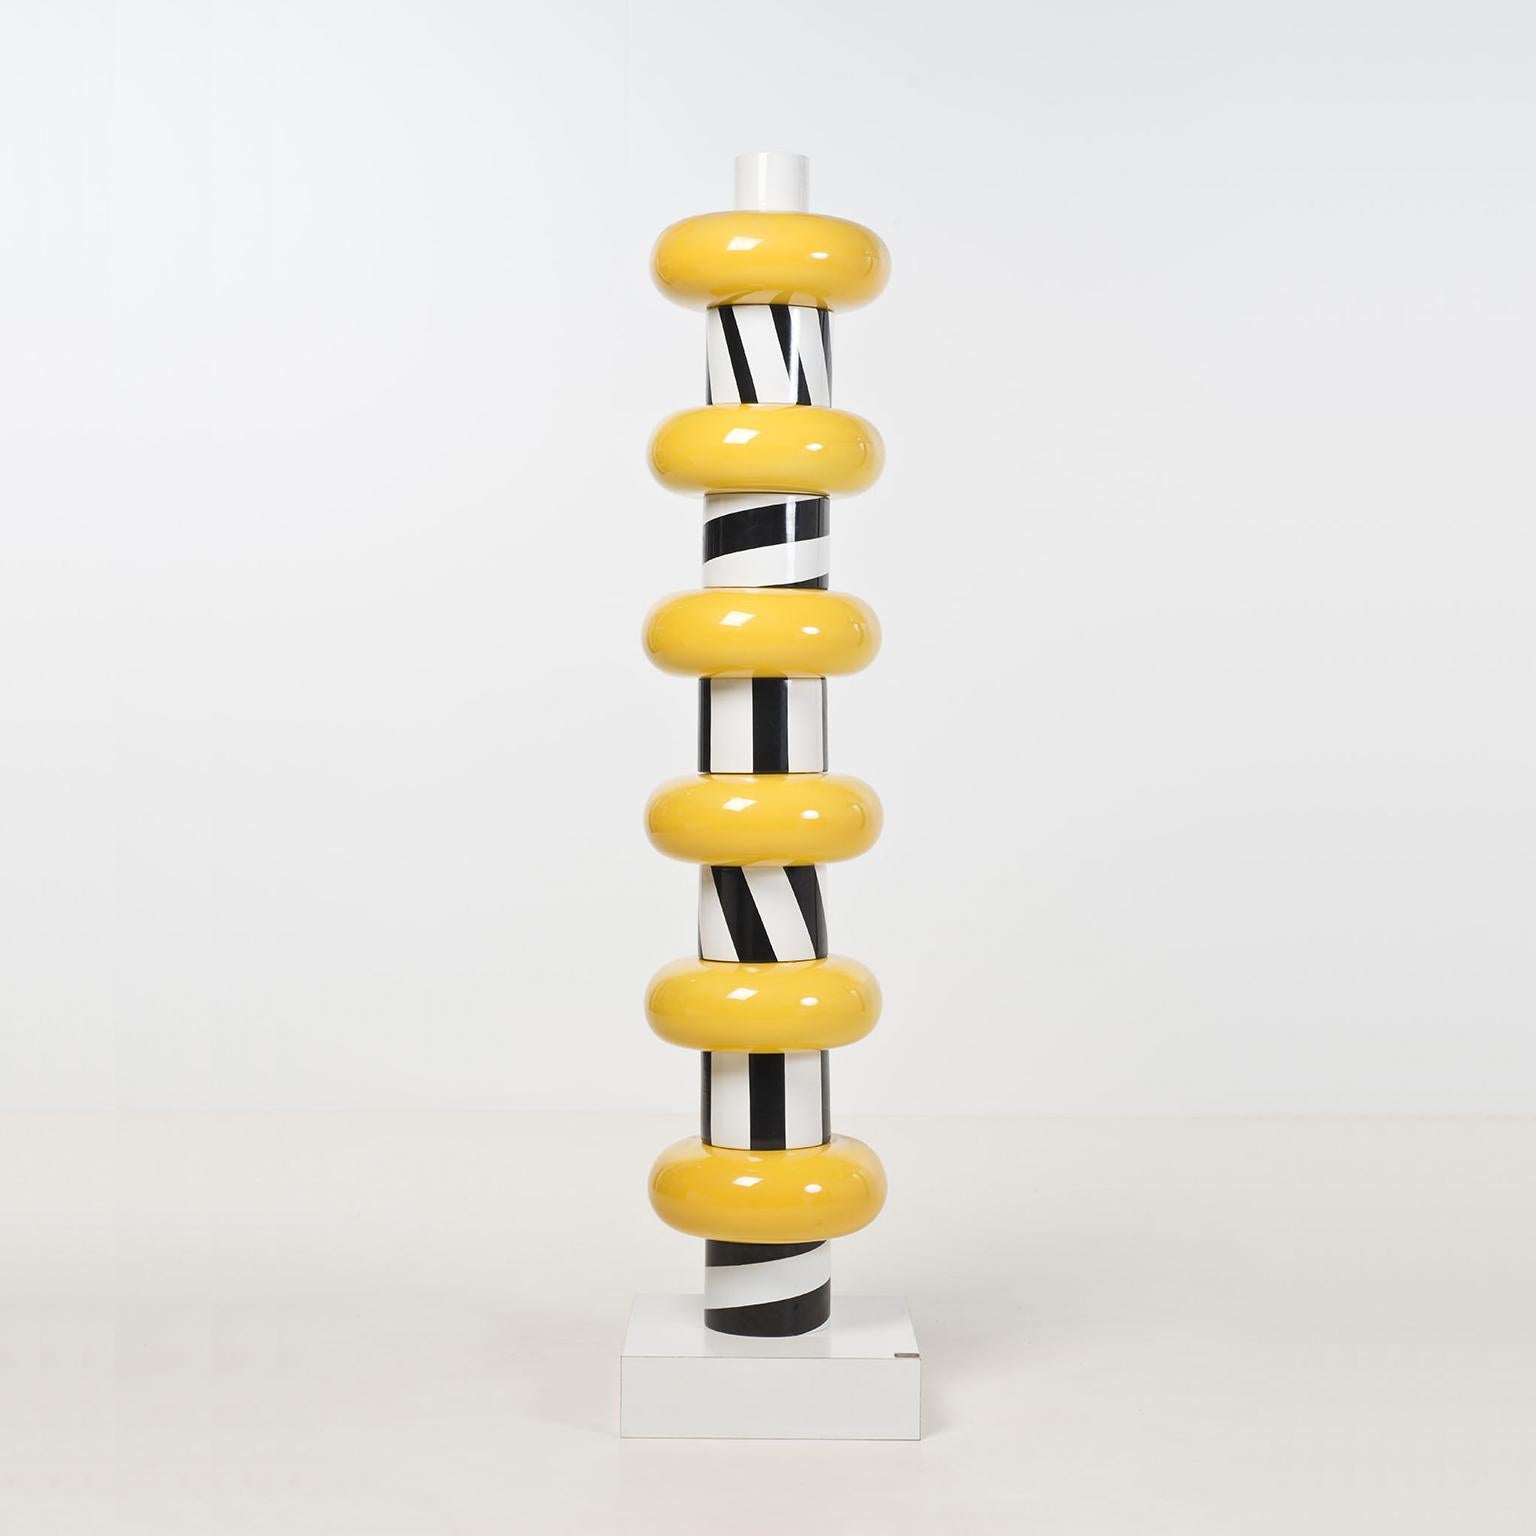 Limited rdition of 29 pieces.
These ceramic columns evoke Totems and Menhir, ancient architectures or imaginary archetypes, among timeless sacredness and contemporary irony.